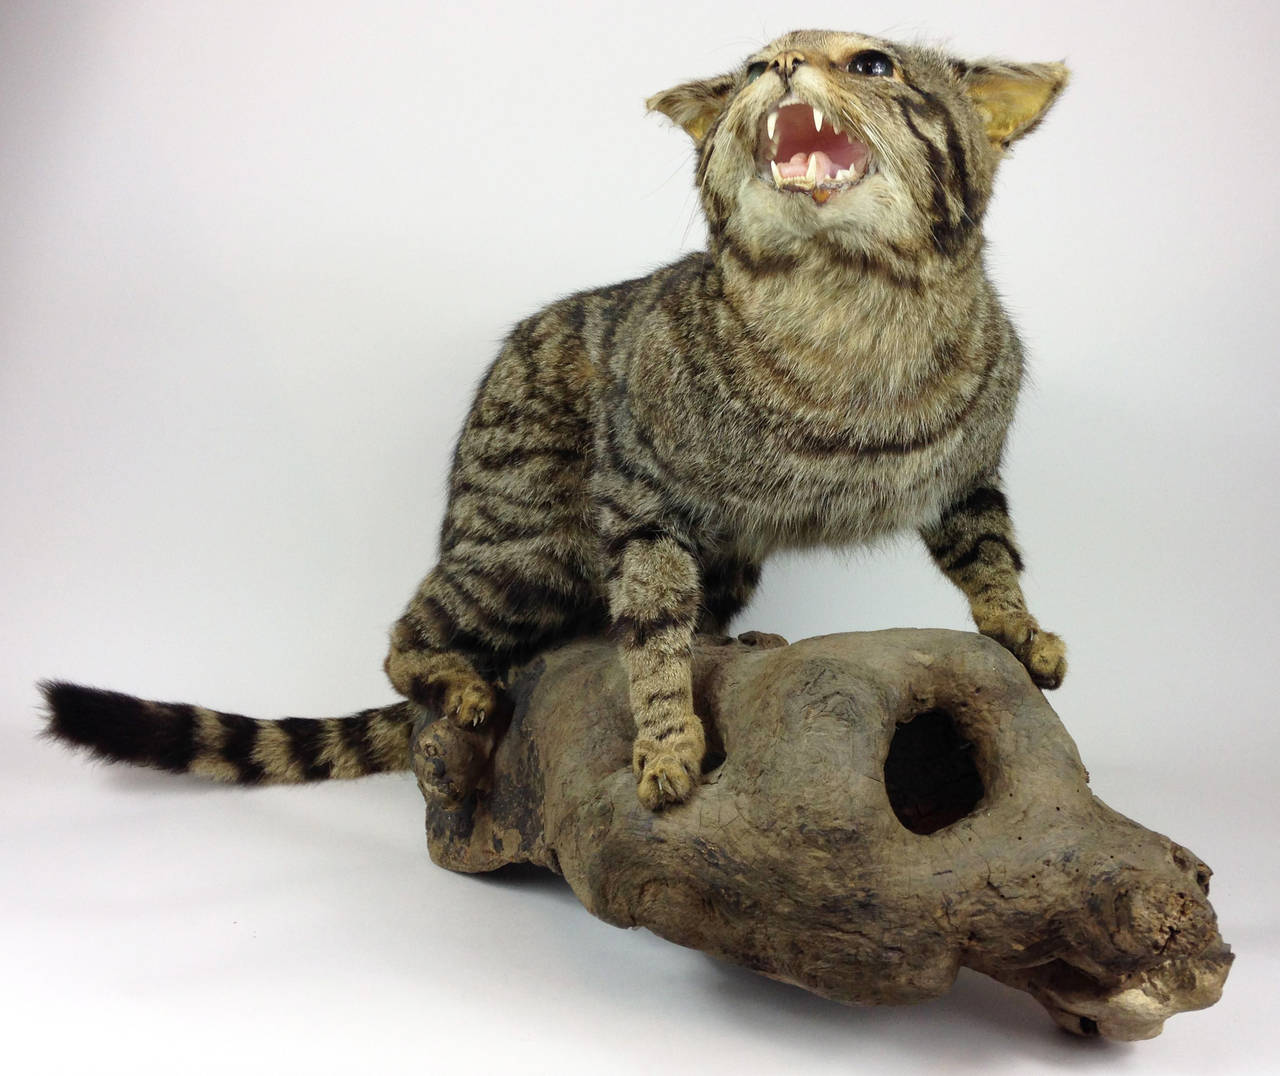 A wonderful example of a Scottish Wildcat (Felis silvestris silvestris). 

A very rare specimen in wonderful condition with no apparent loss or damage. Similar to the household cat in appearance but a significantly larger, more muscular